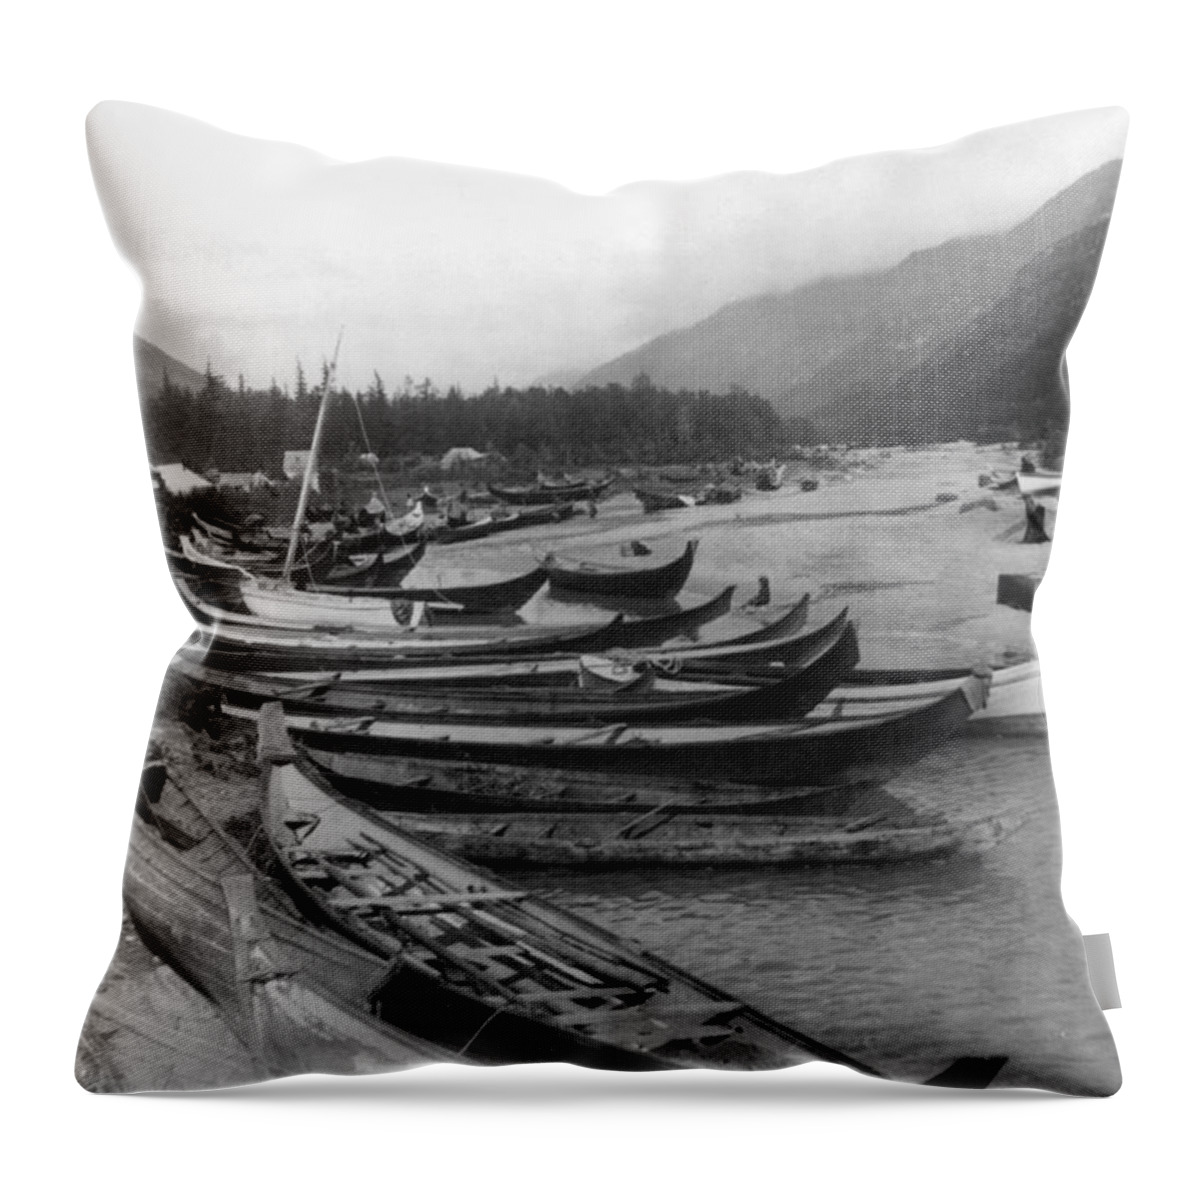 1897 Throw Pillow featuring the photograph Alaska Canoes, C1897 by Granger